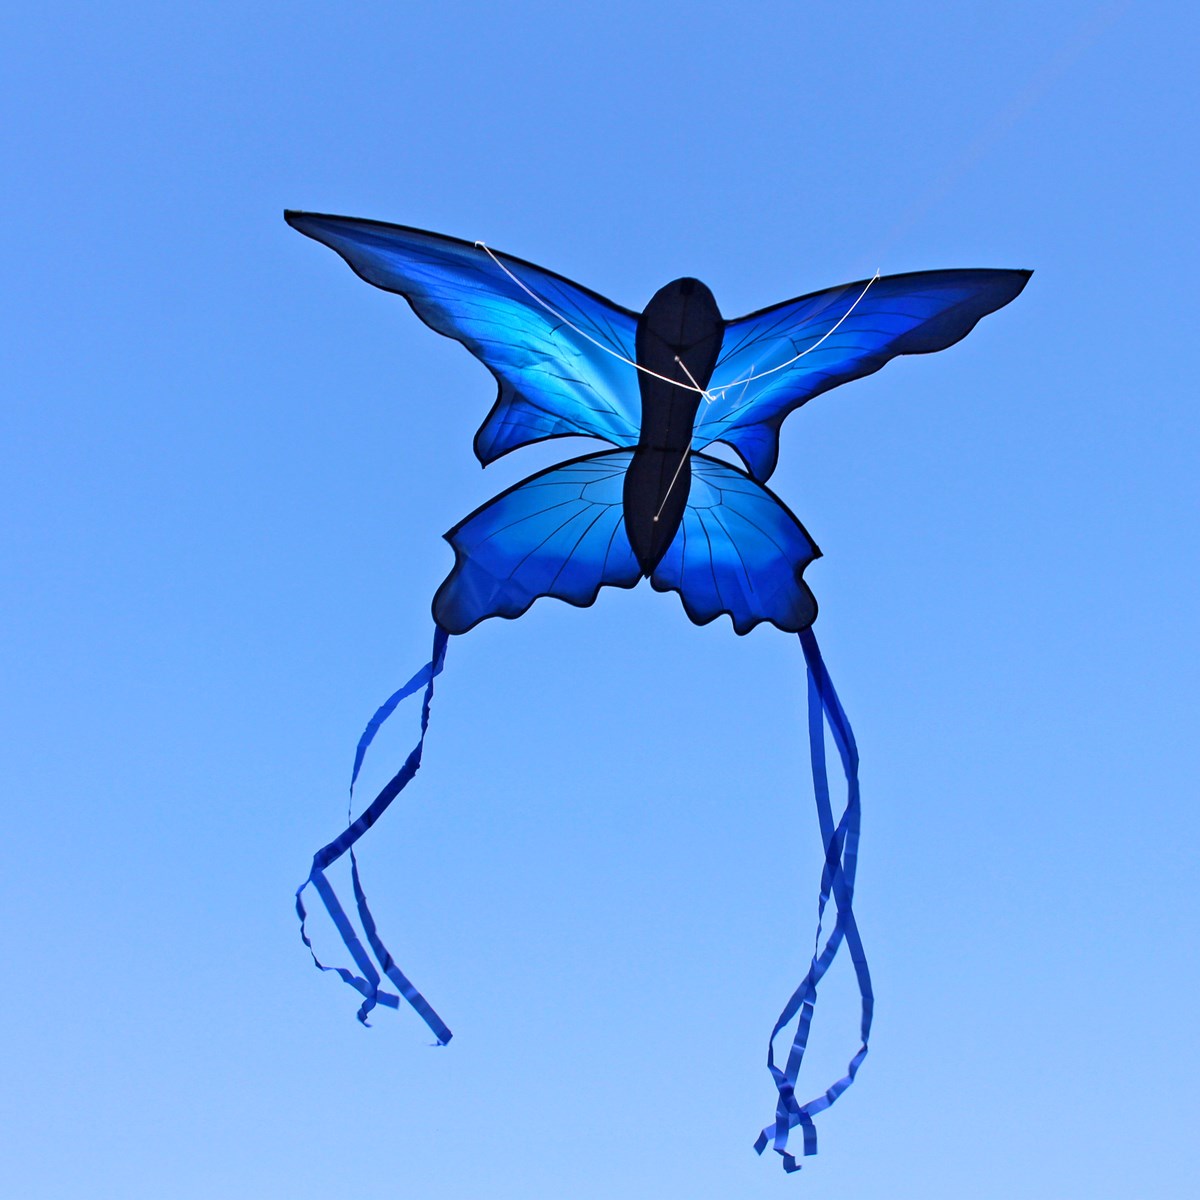 70x150cm-Blue-Beautiful-Butterfly-Kite-Outdoor-Fun-Sports-Flying-Toy-With-30M-Control-Bar-and-Line-1369720